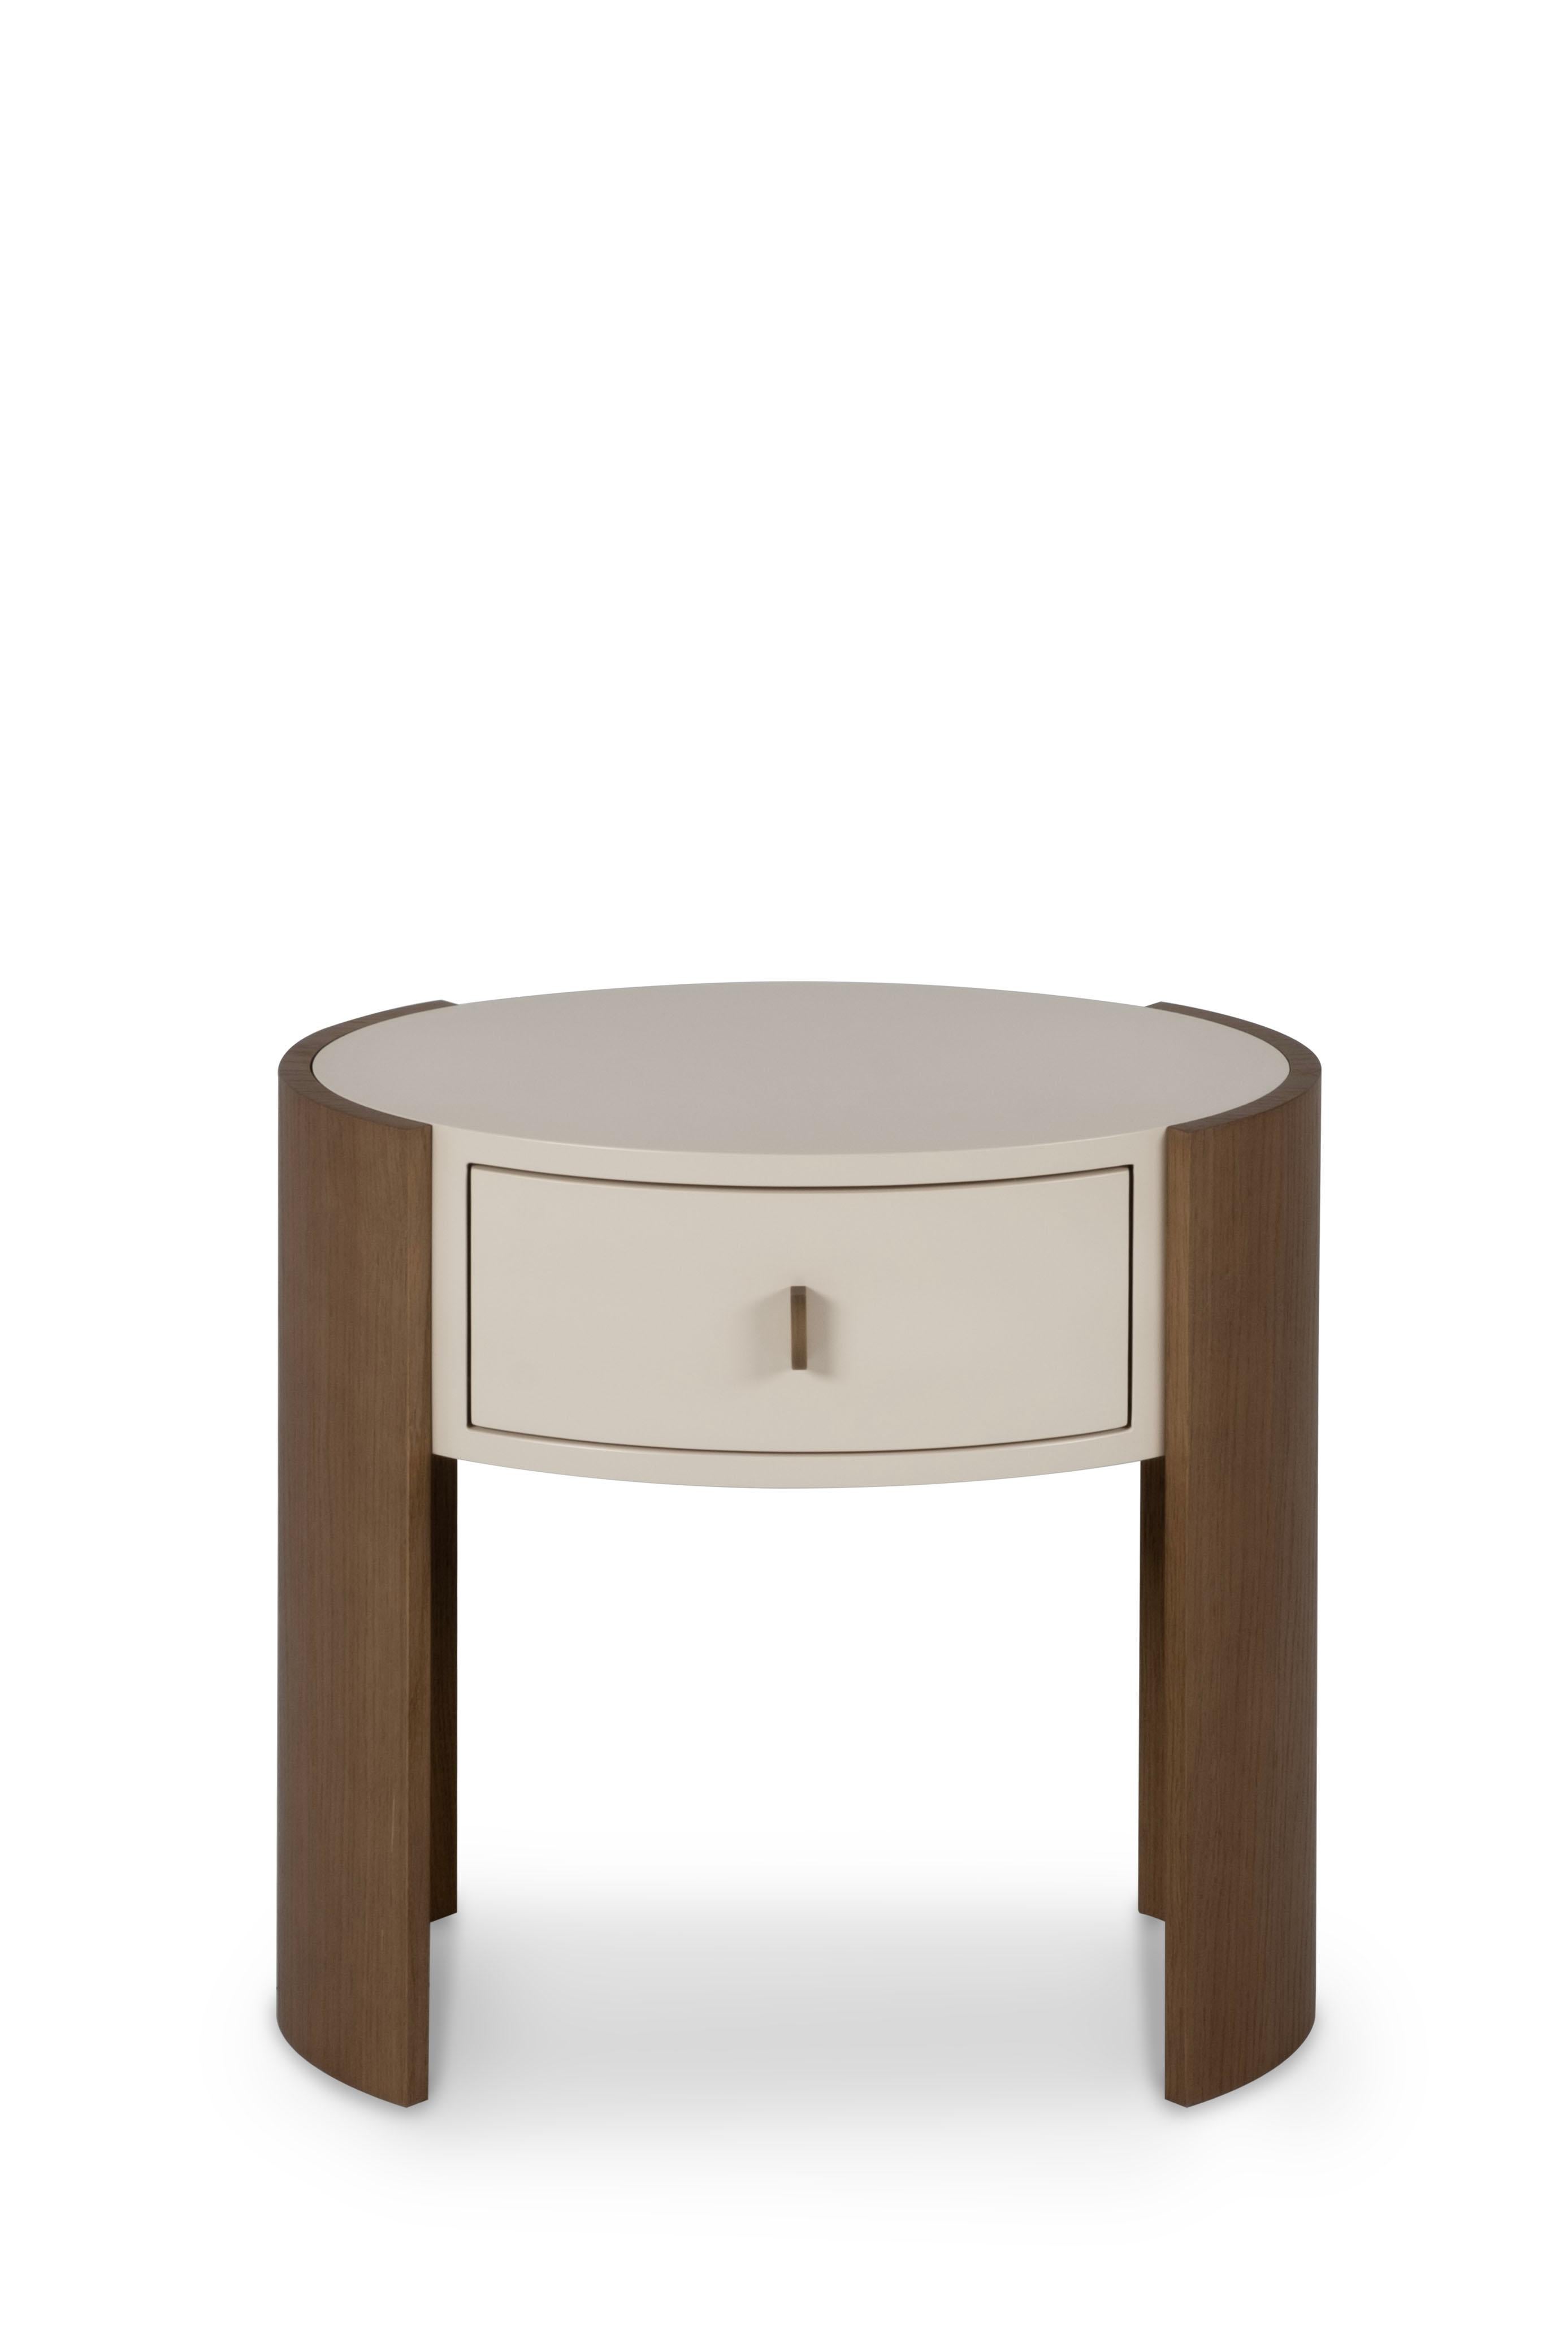 Toscana Nightstand, Contemporary Collection, Handcrafted in Portugal - Europe by Greenapple.

The organic modern Toscana nightstand is a captivating blend of natural beauty and contemporary design, where true freedom of movement allows the creative